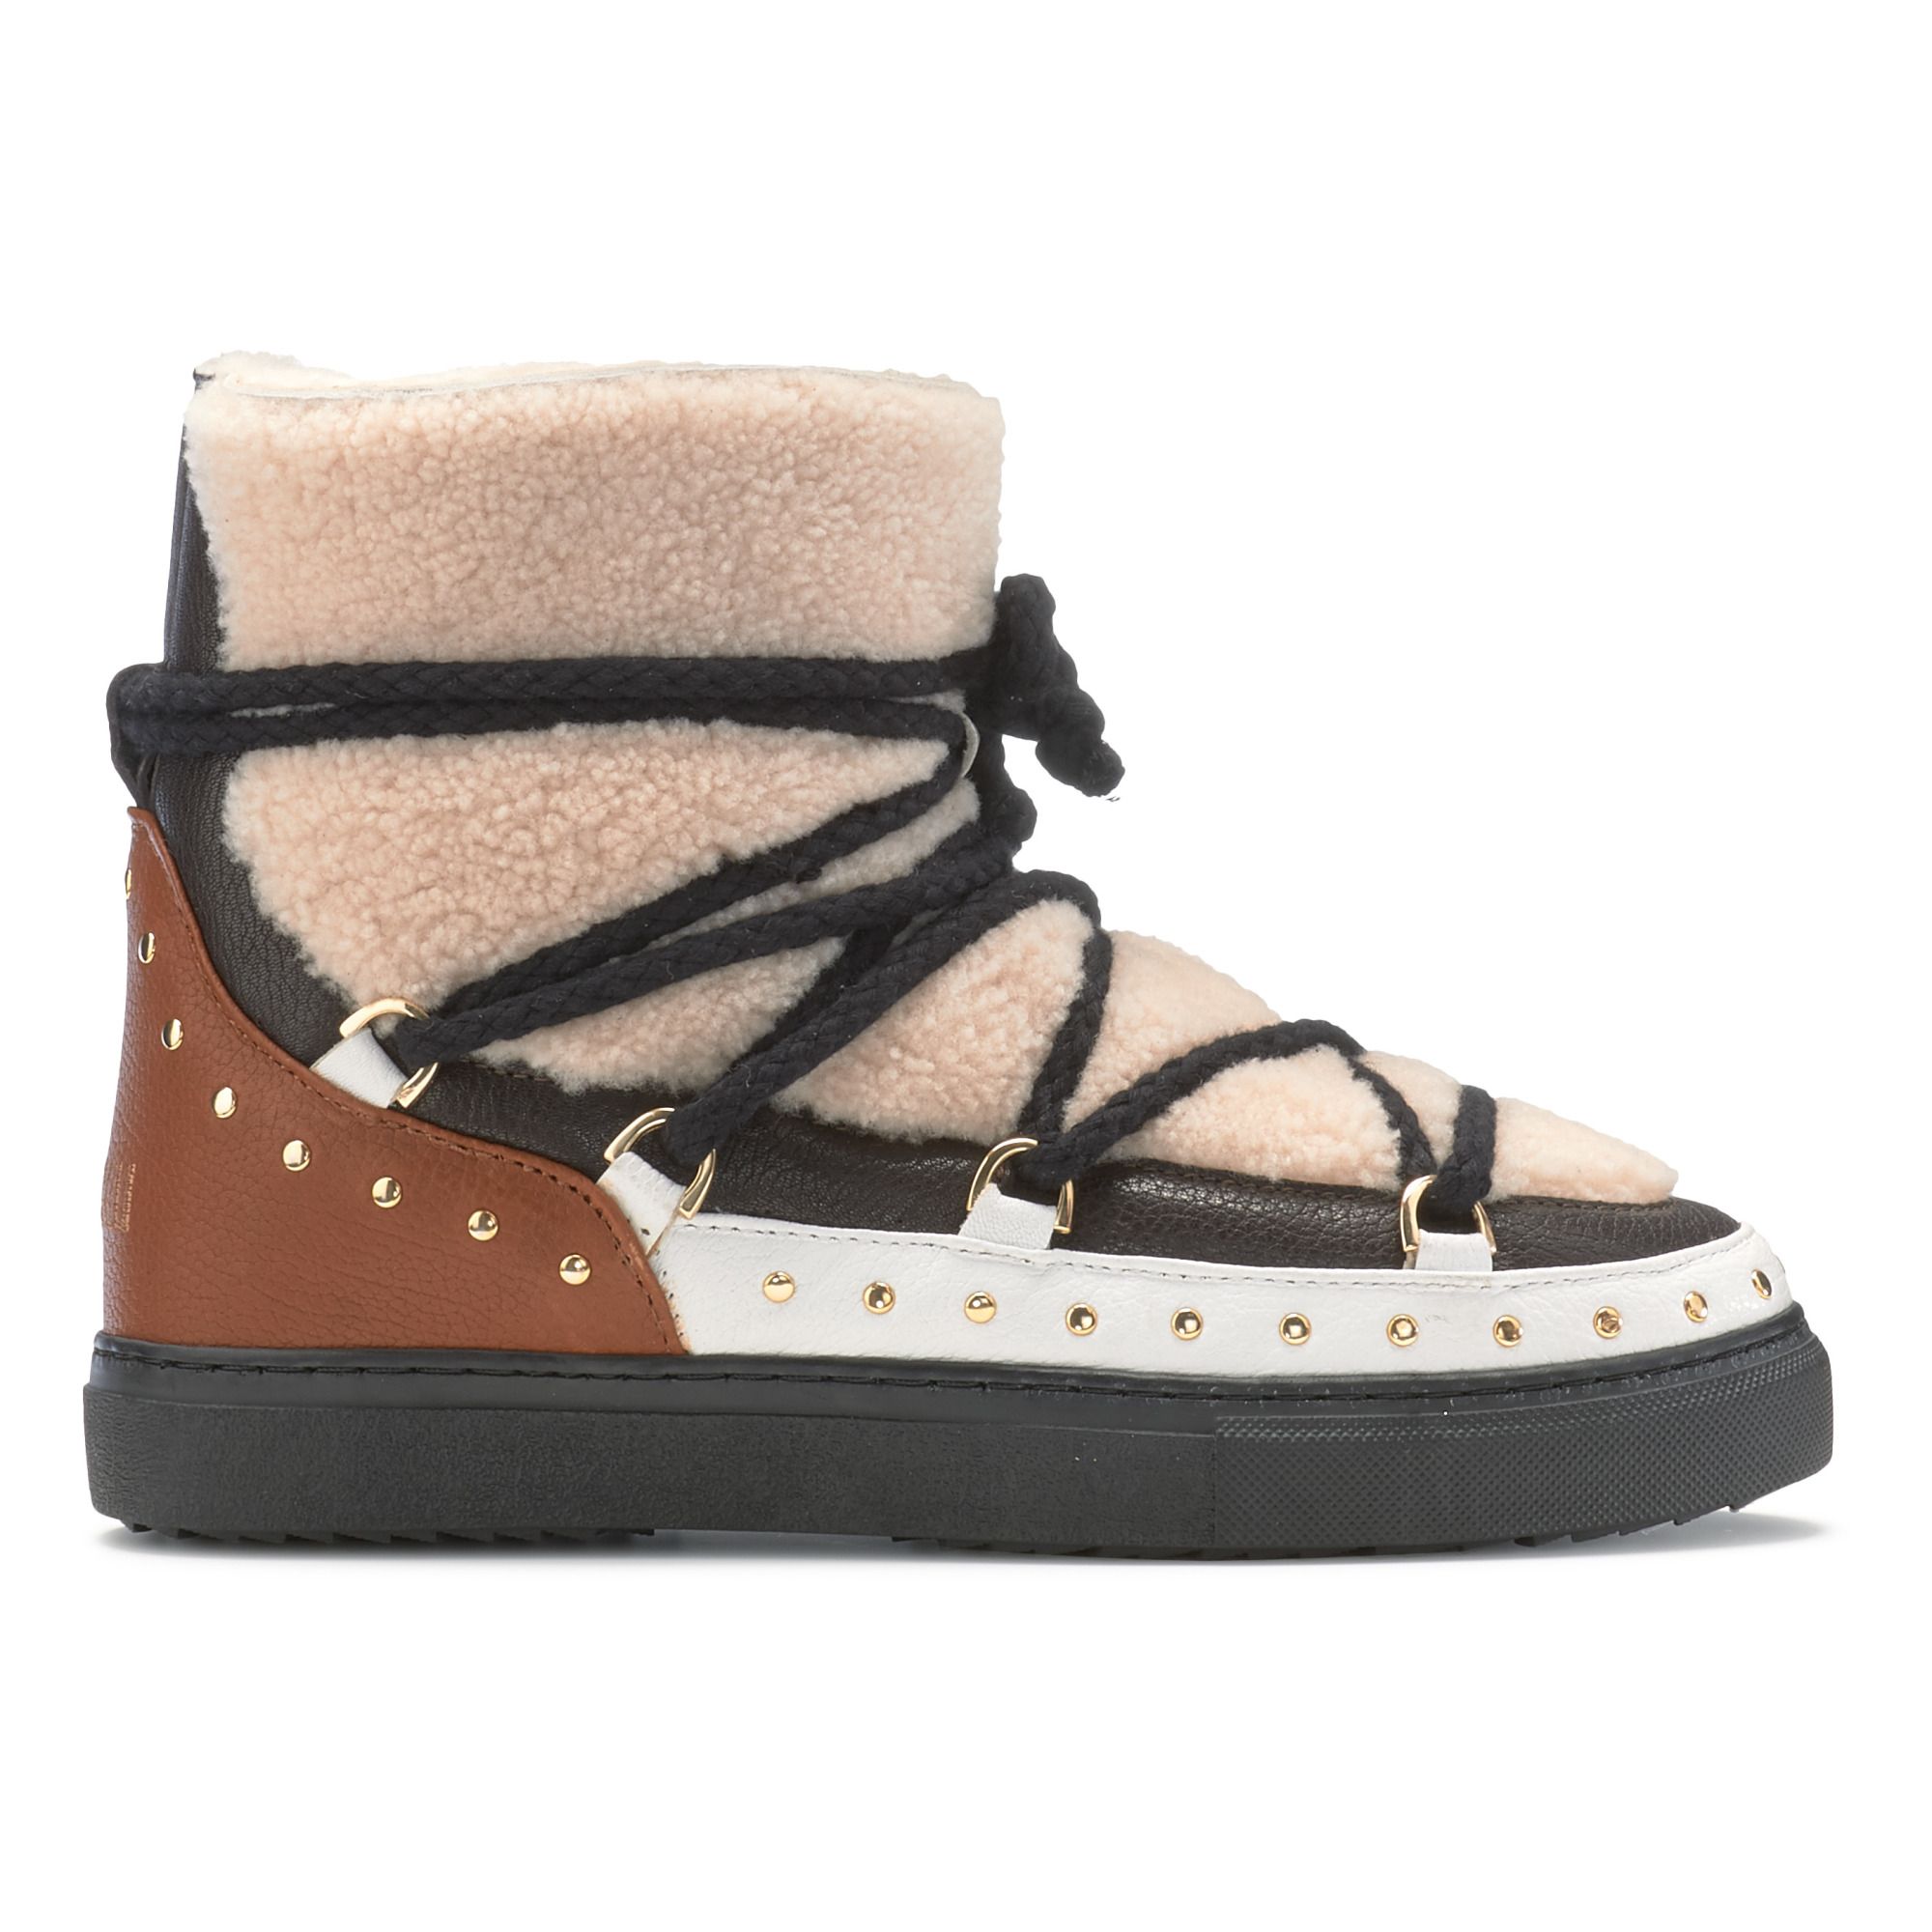 Inuikii - Sneaker Curly Rock - Collection Femme - - Crème